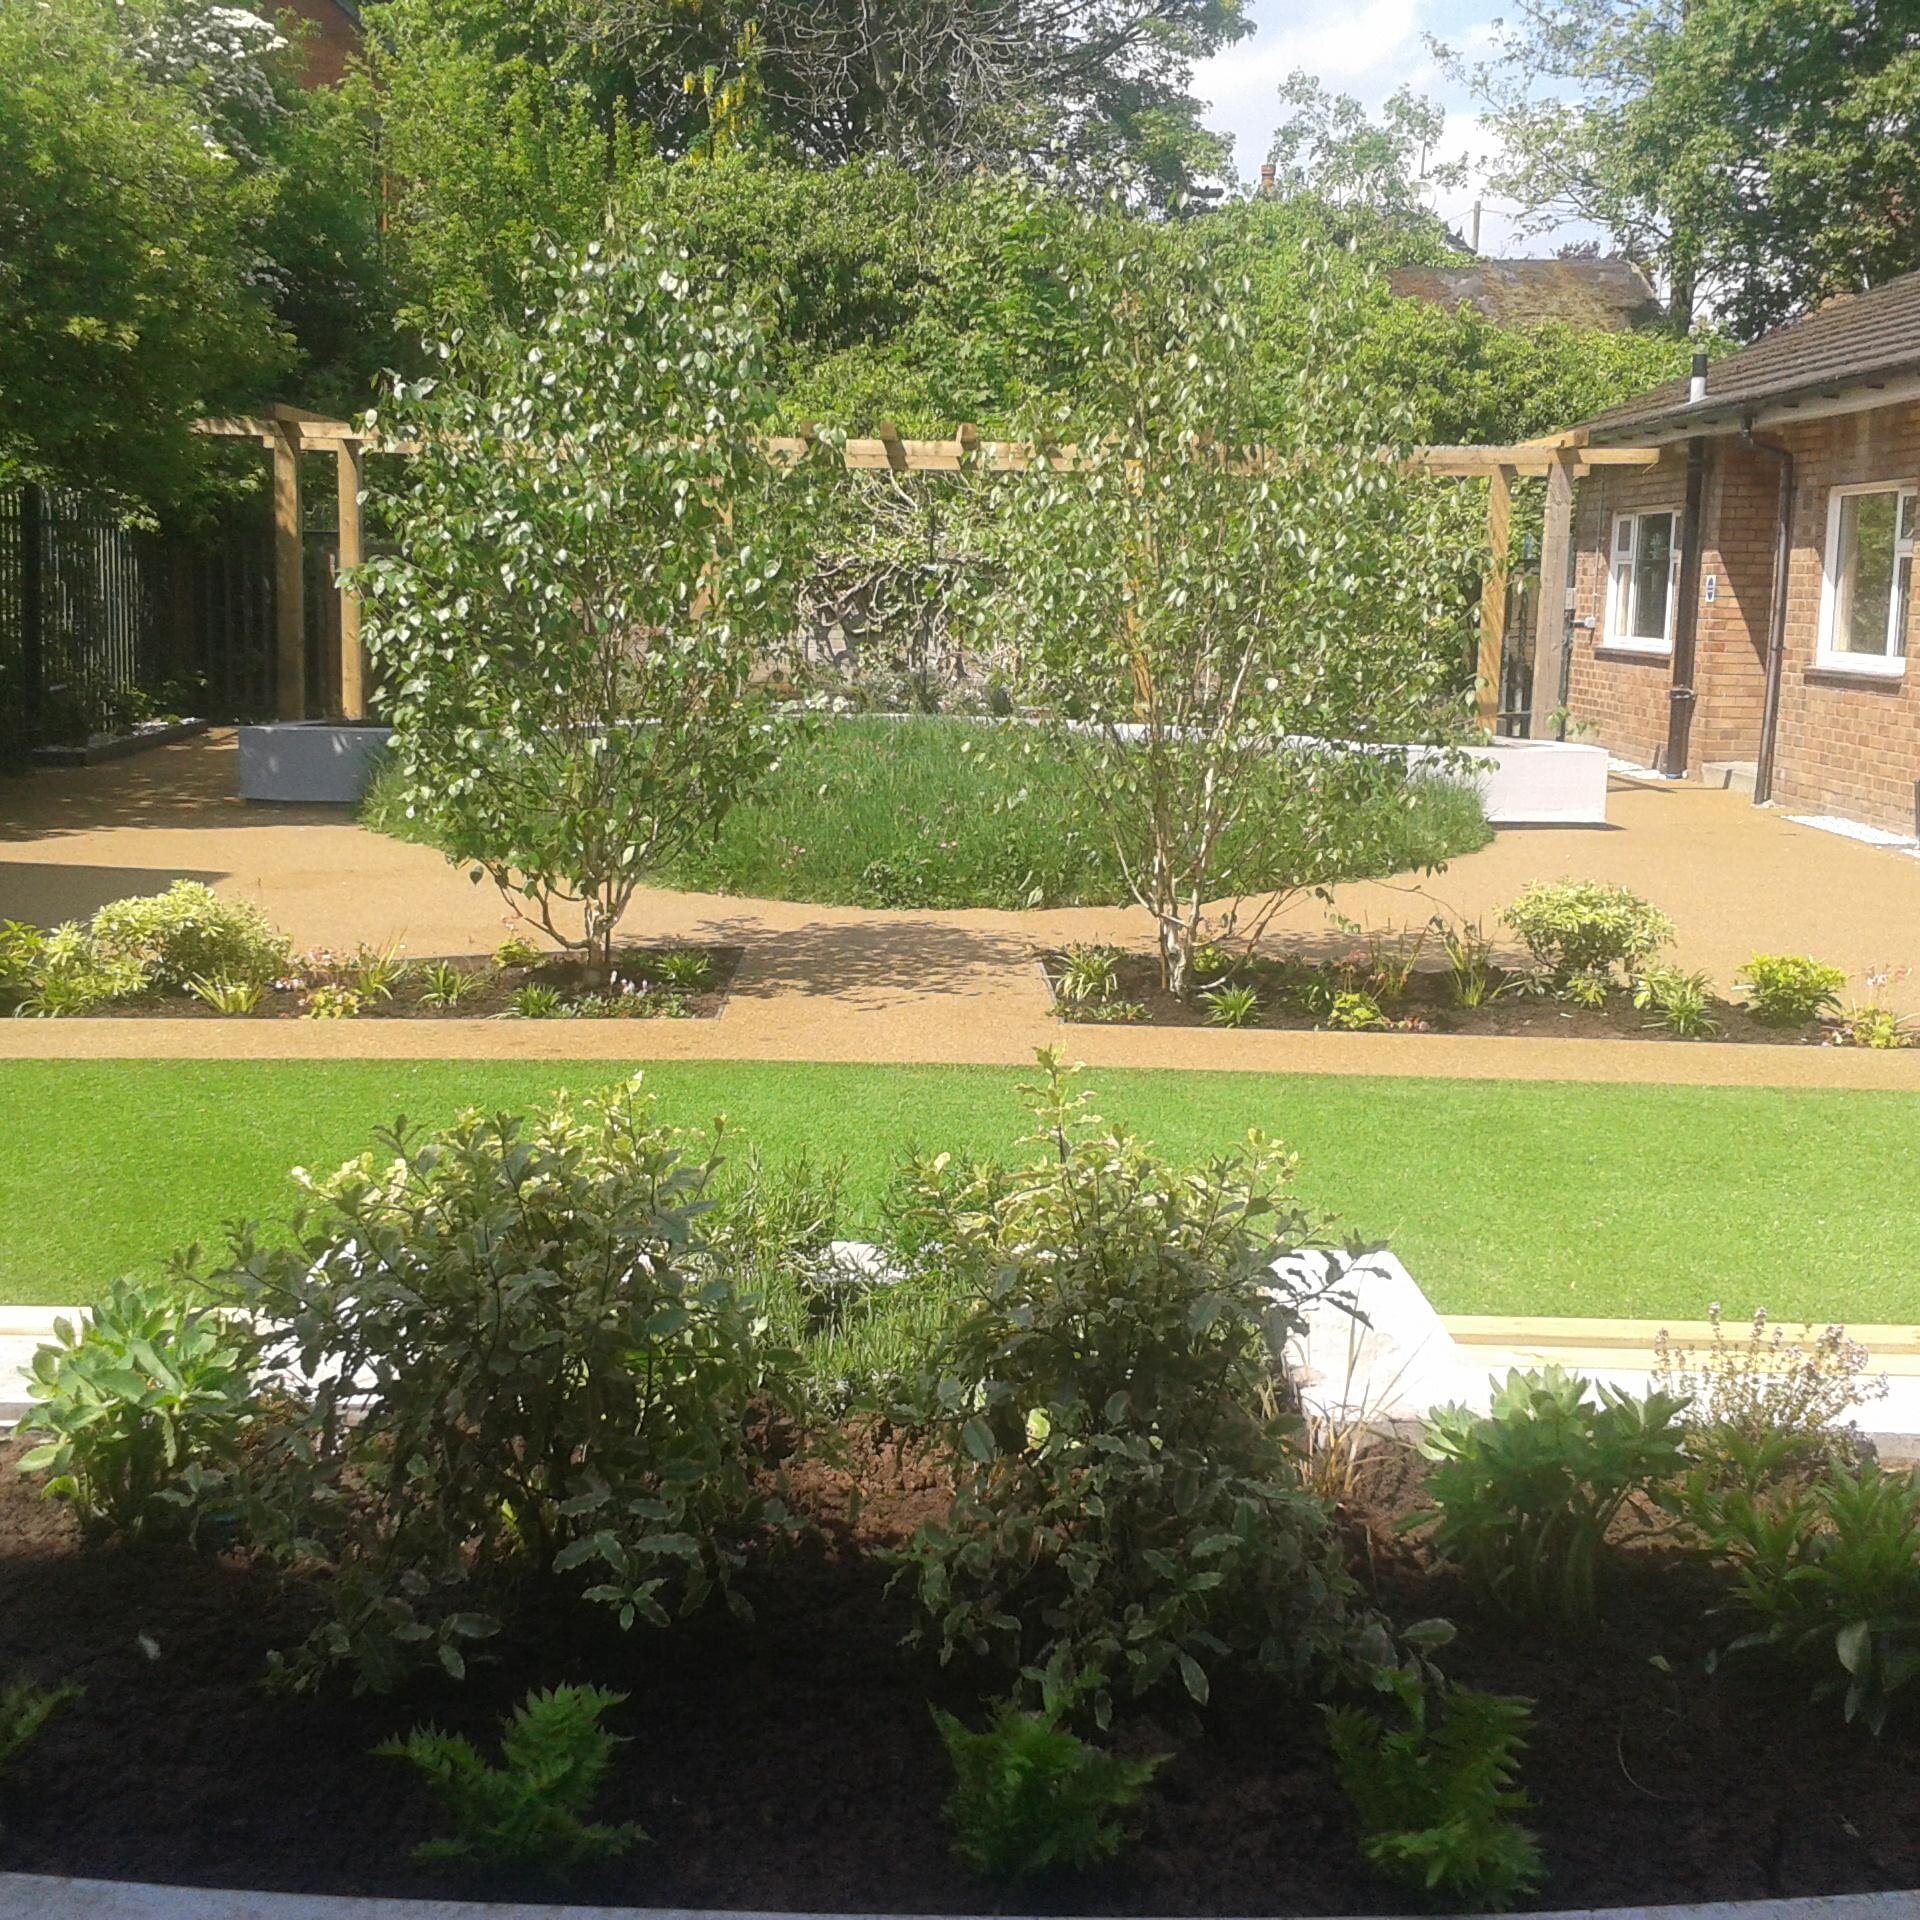 Precision Gardens offer professional and reliable grounds maintenance services, vegetation clearance, invasive species management & fencing installations